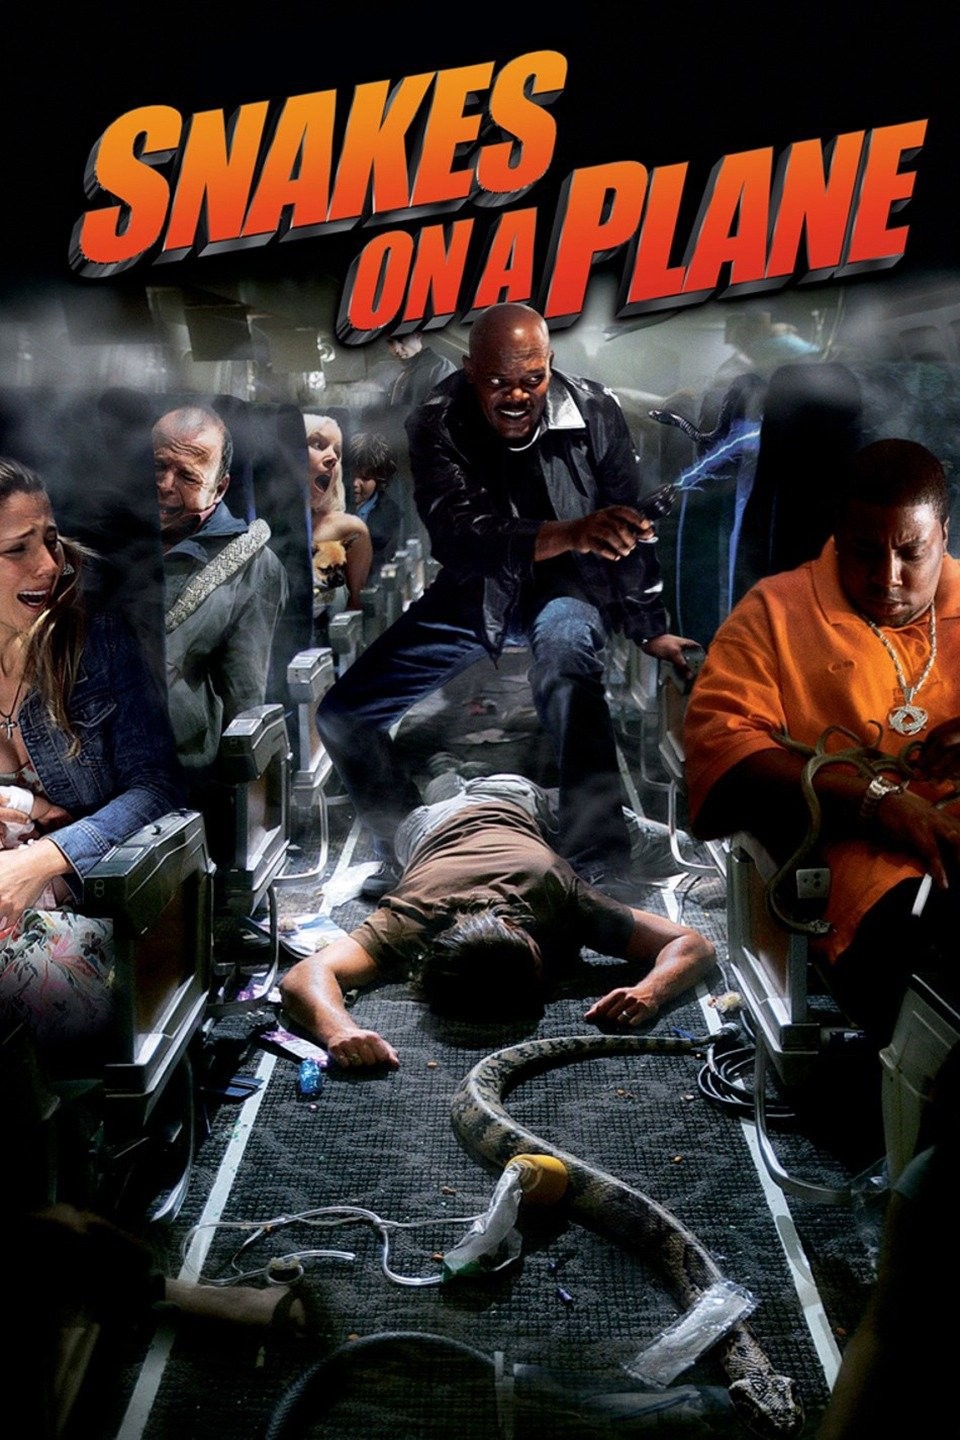 FULL MOVIE: Snakes On A Plane (2006)